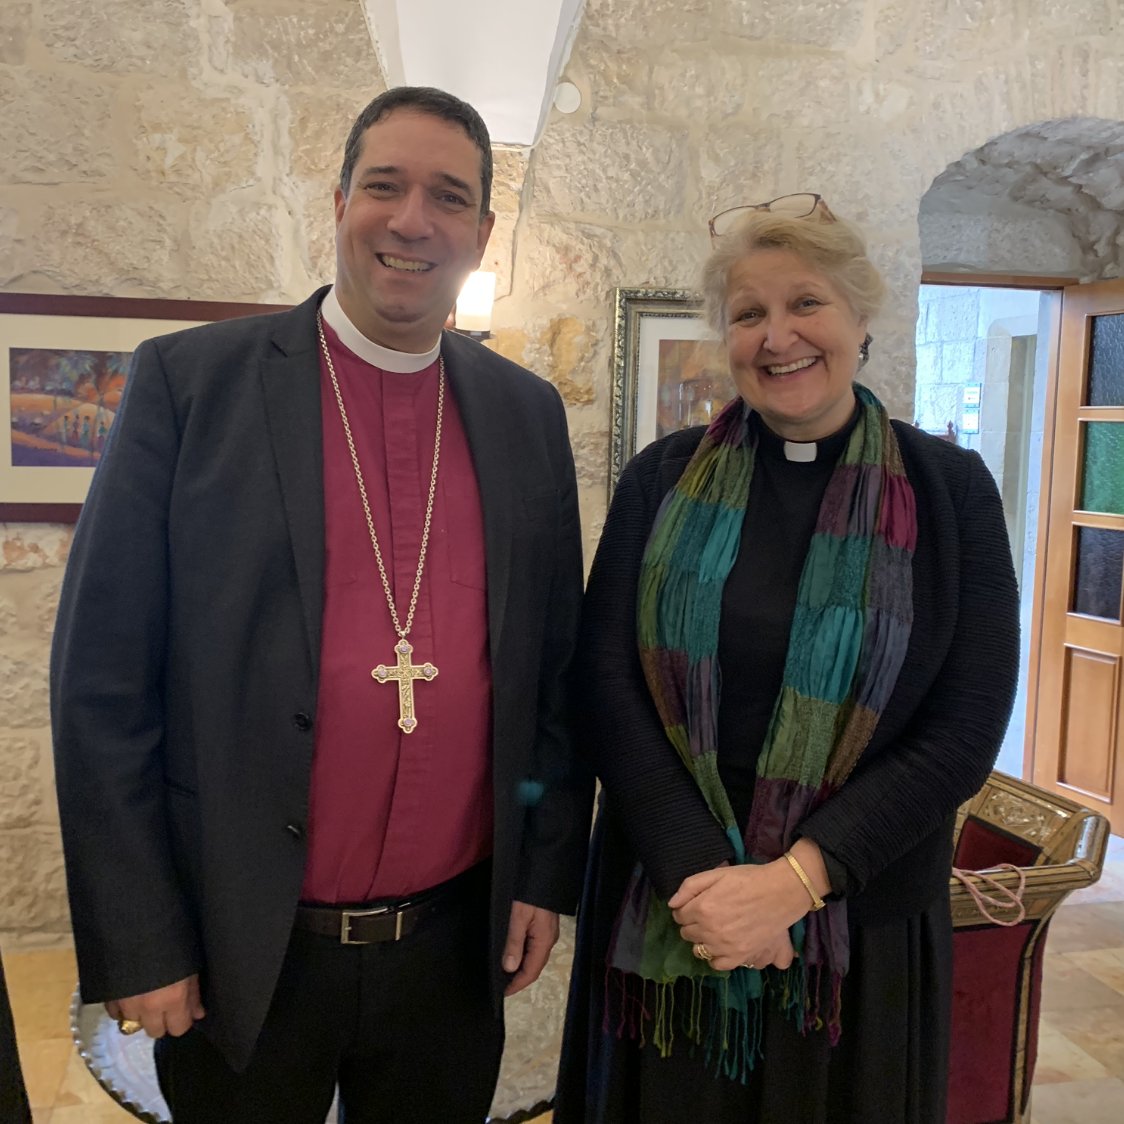 A humanitarian funding appeal, coordinated by the Episcopal Diocese of Jerusalem with the Anglican Alliance, is continuing to provide much needed support to people impacted by conflict in the Holy Land. Canon Rachel Carnegie, the Executive Director of the Anglican Alliance, has…